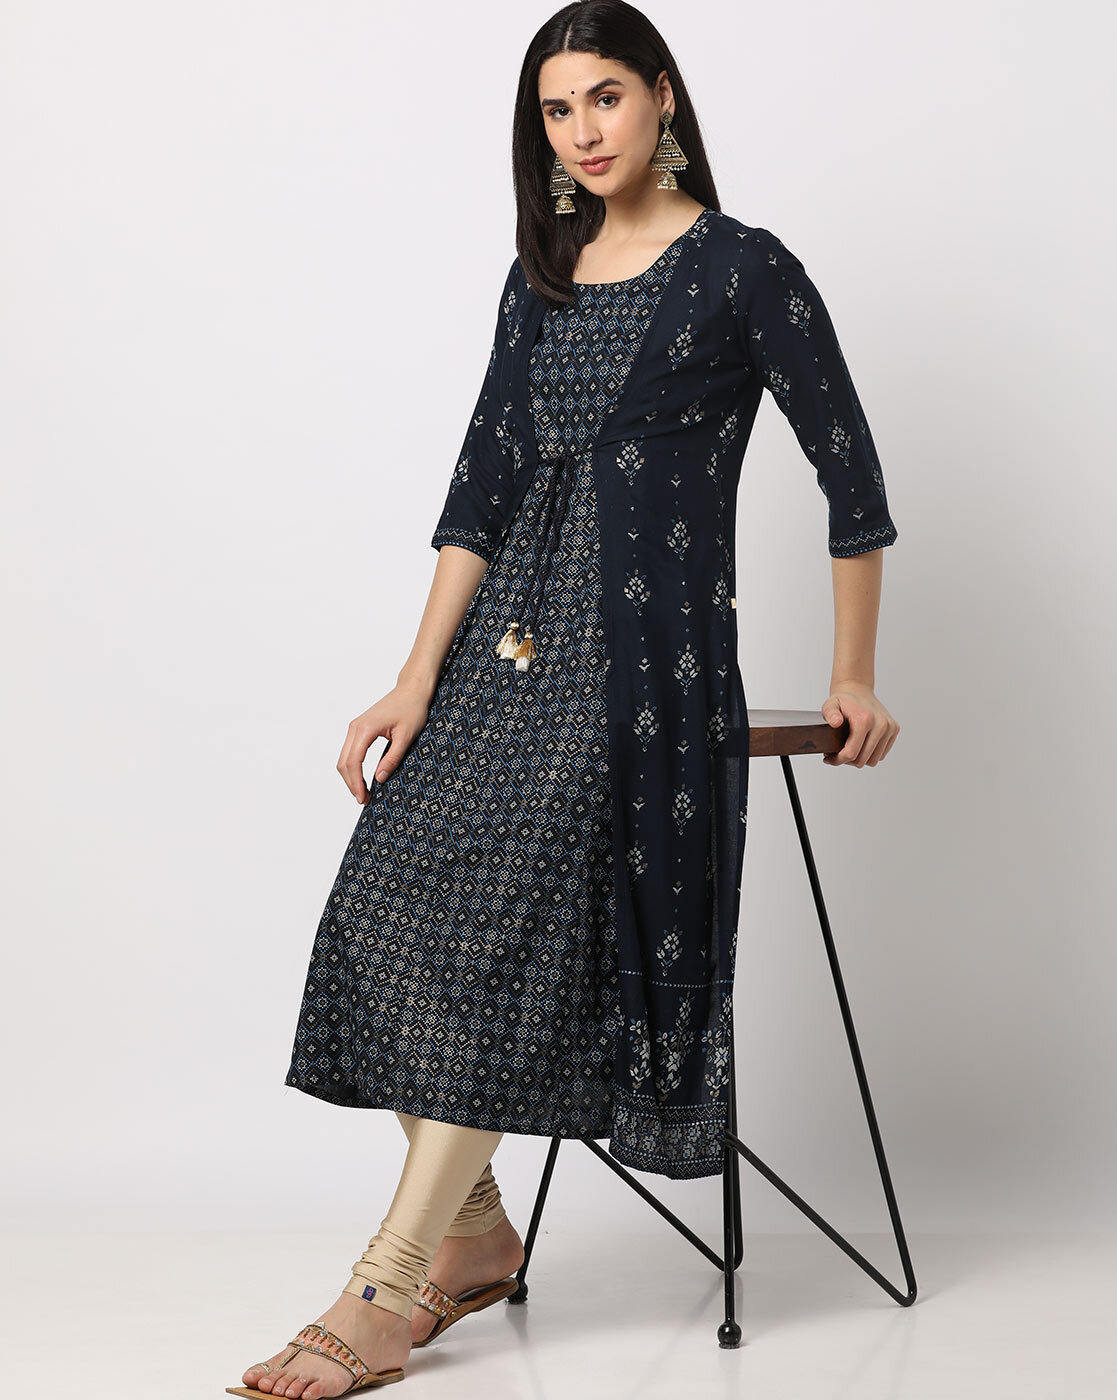 Golden Navy Blue Kurtis Online Shopping for Women at Low Prices